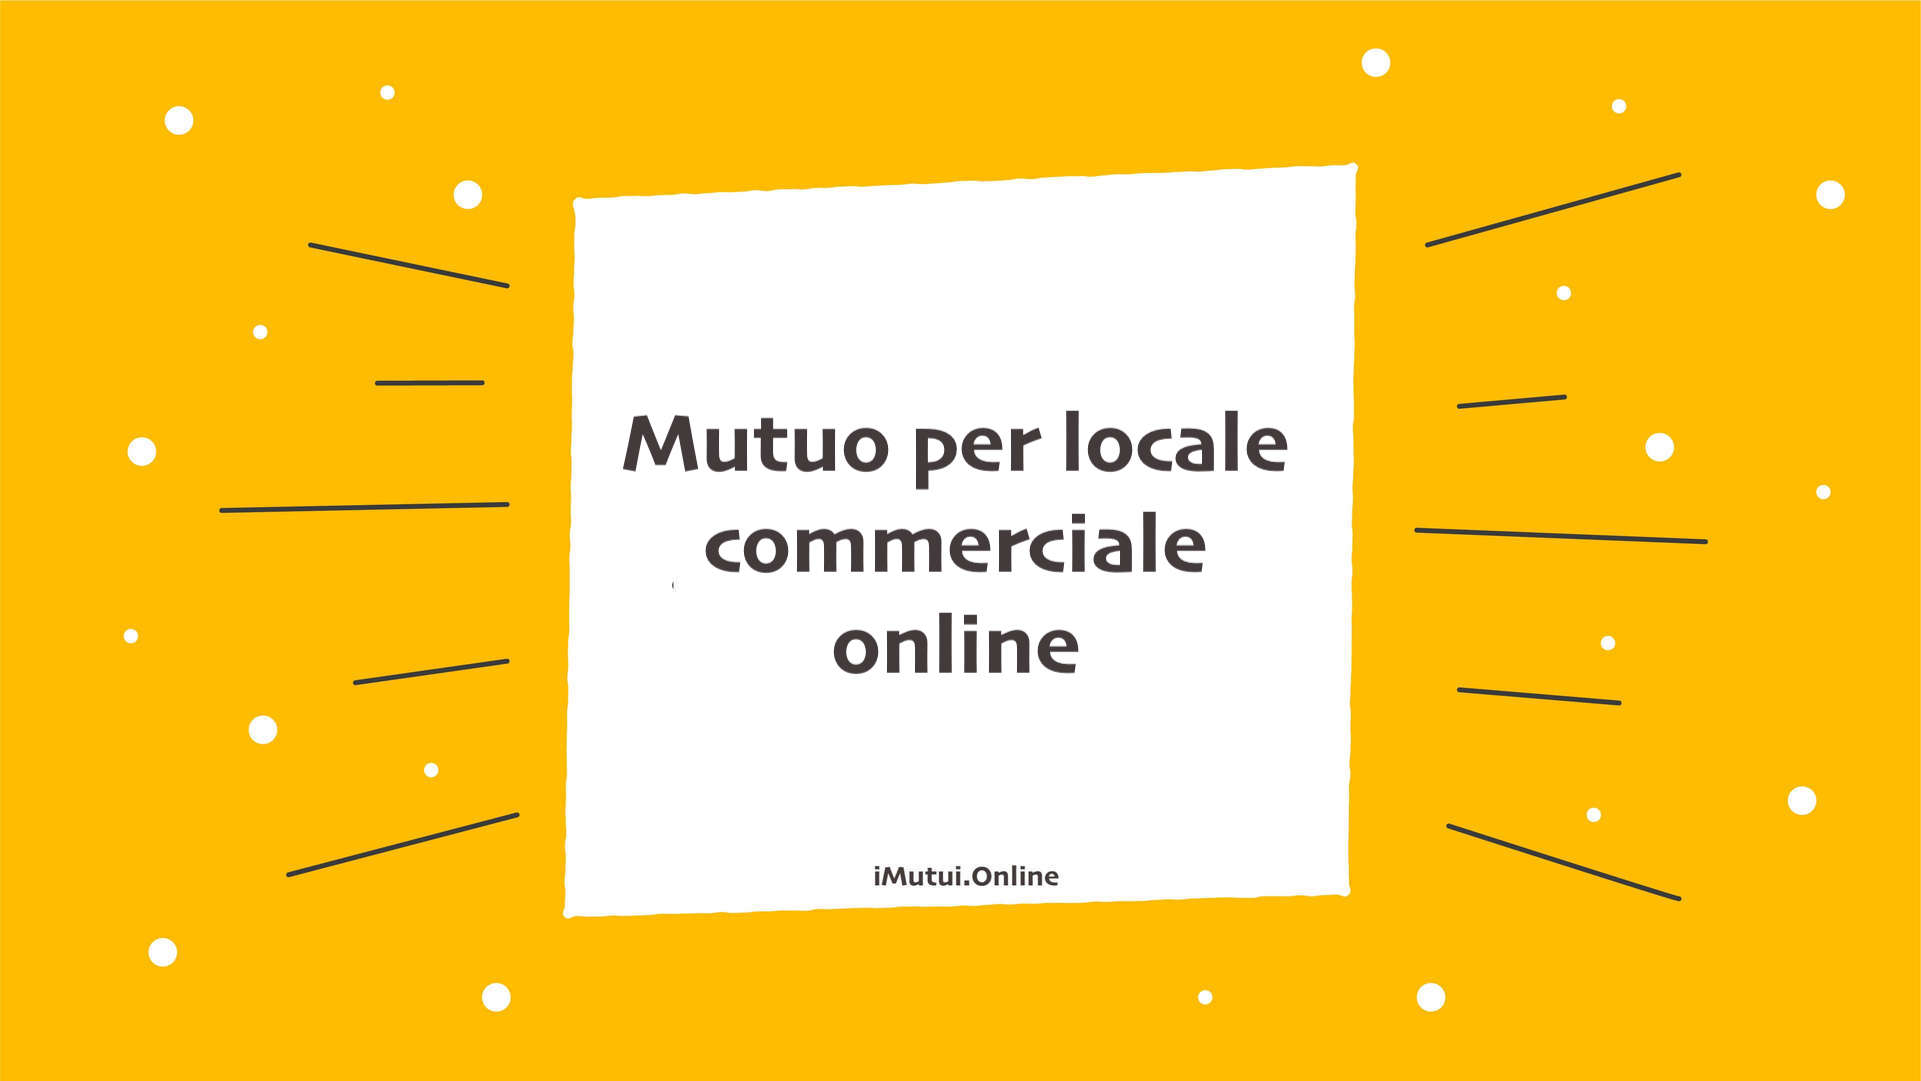 Mutuo per locale commerciale online